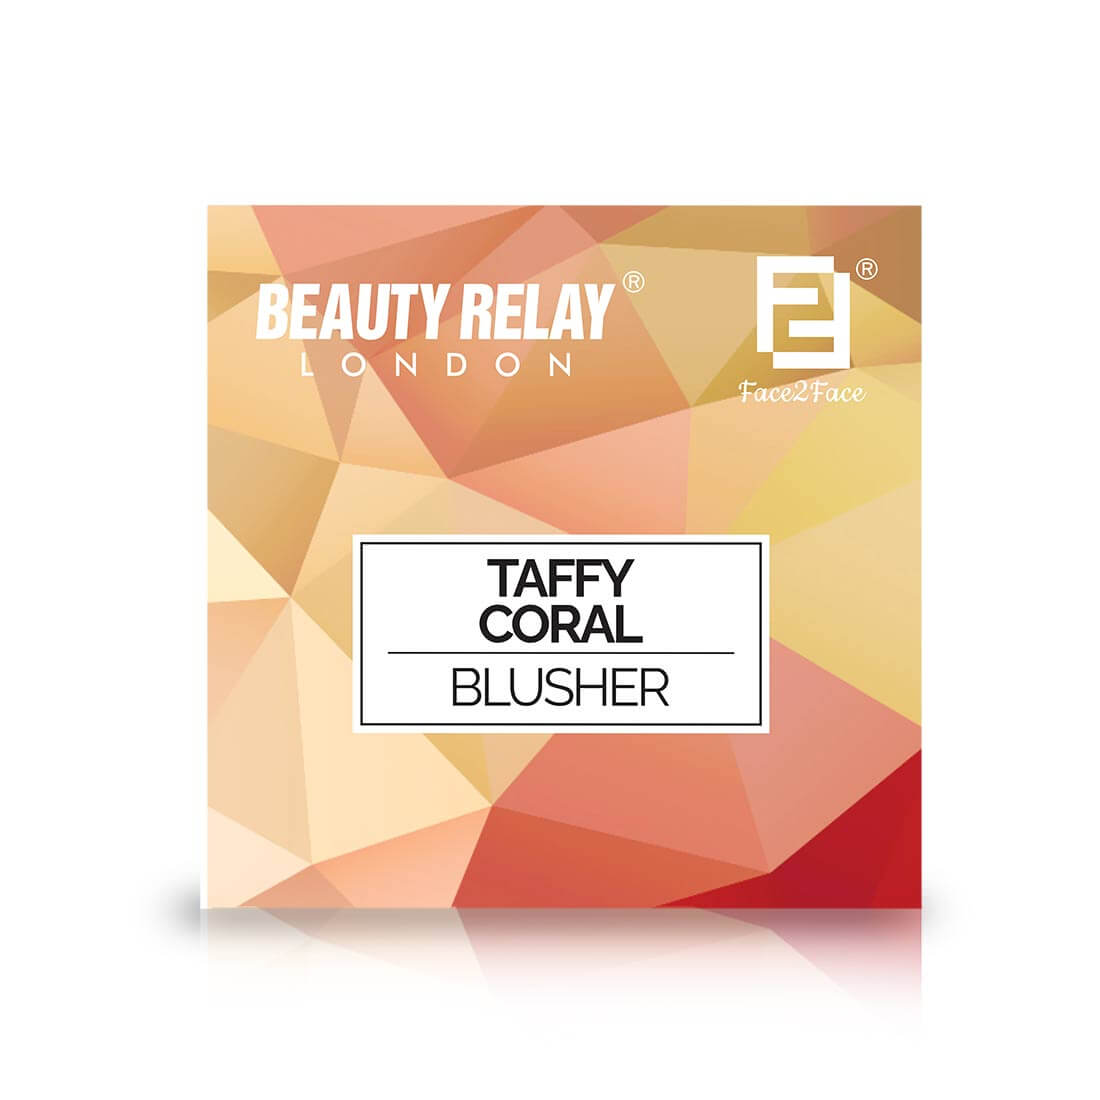 Get A Beauty Touch With Taffy Coral Blusher